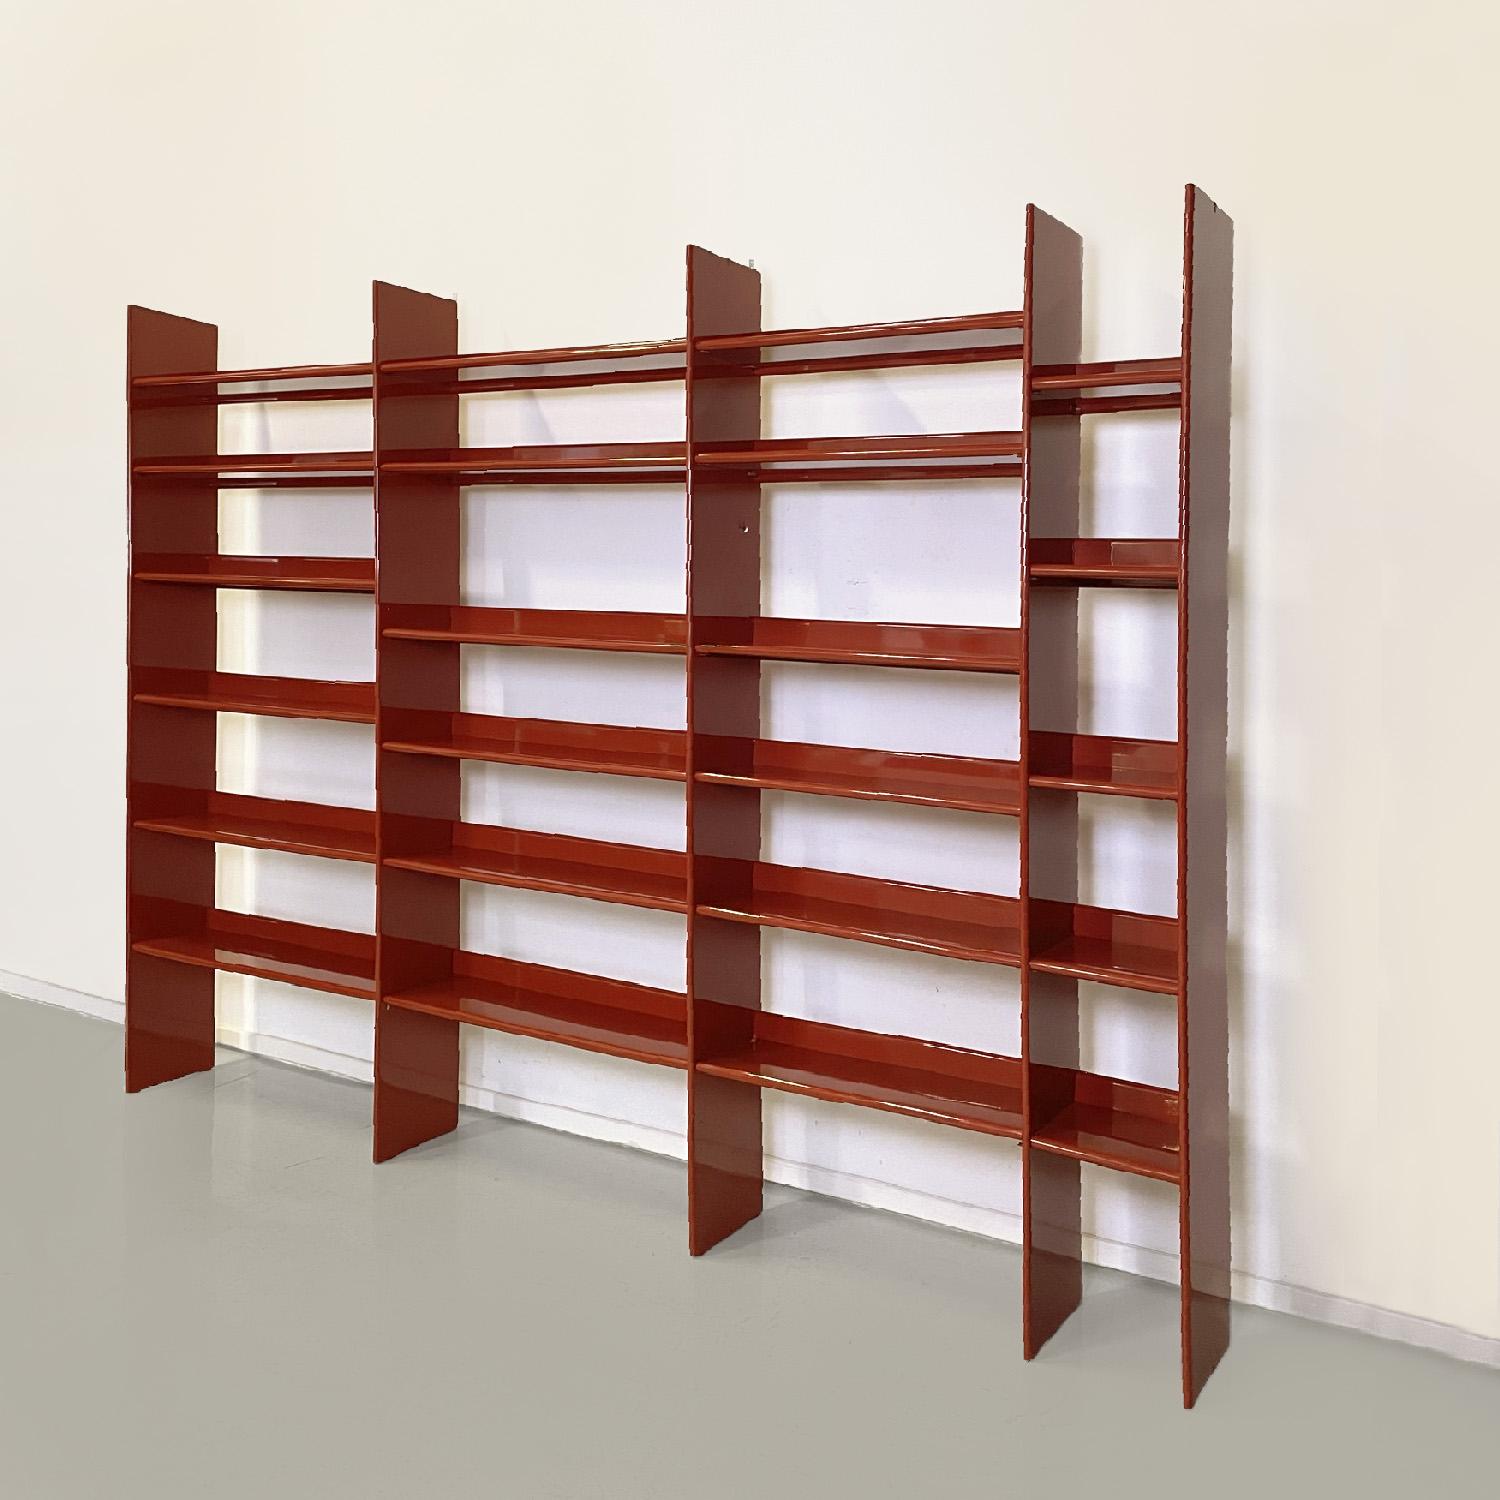 Italian modern red lacquered plywood bookcase, 1970s
Free-standing bookcase in glossy red lacquered plywood. This bookcase features three larger shelving units and one smaller unit. The shelves can be arranged as desired.
1970s.
Good condition, it